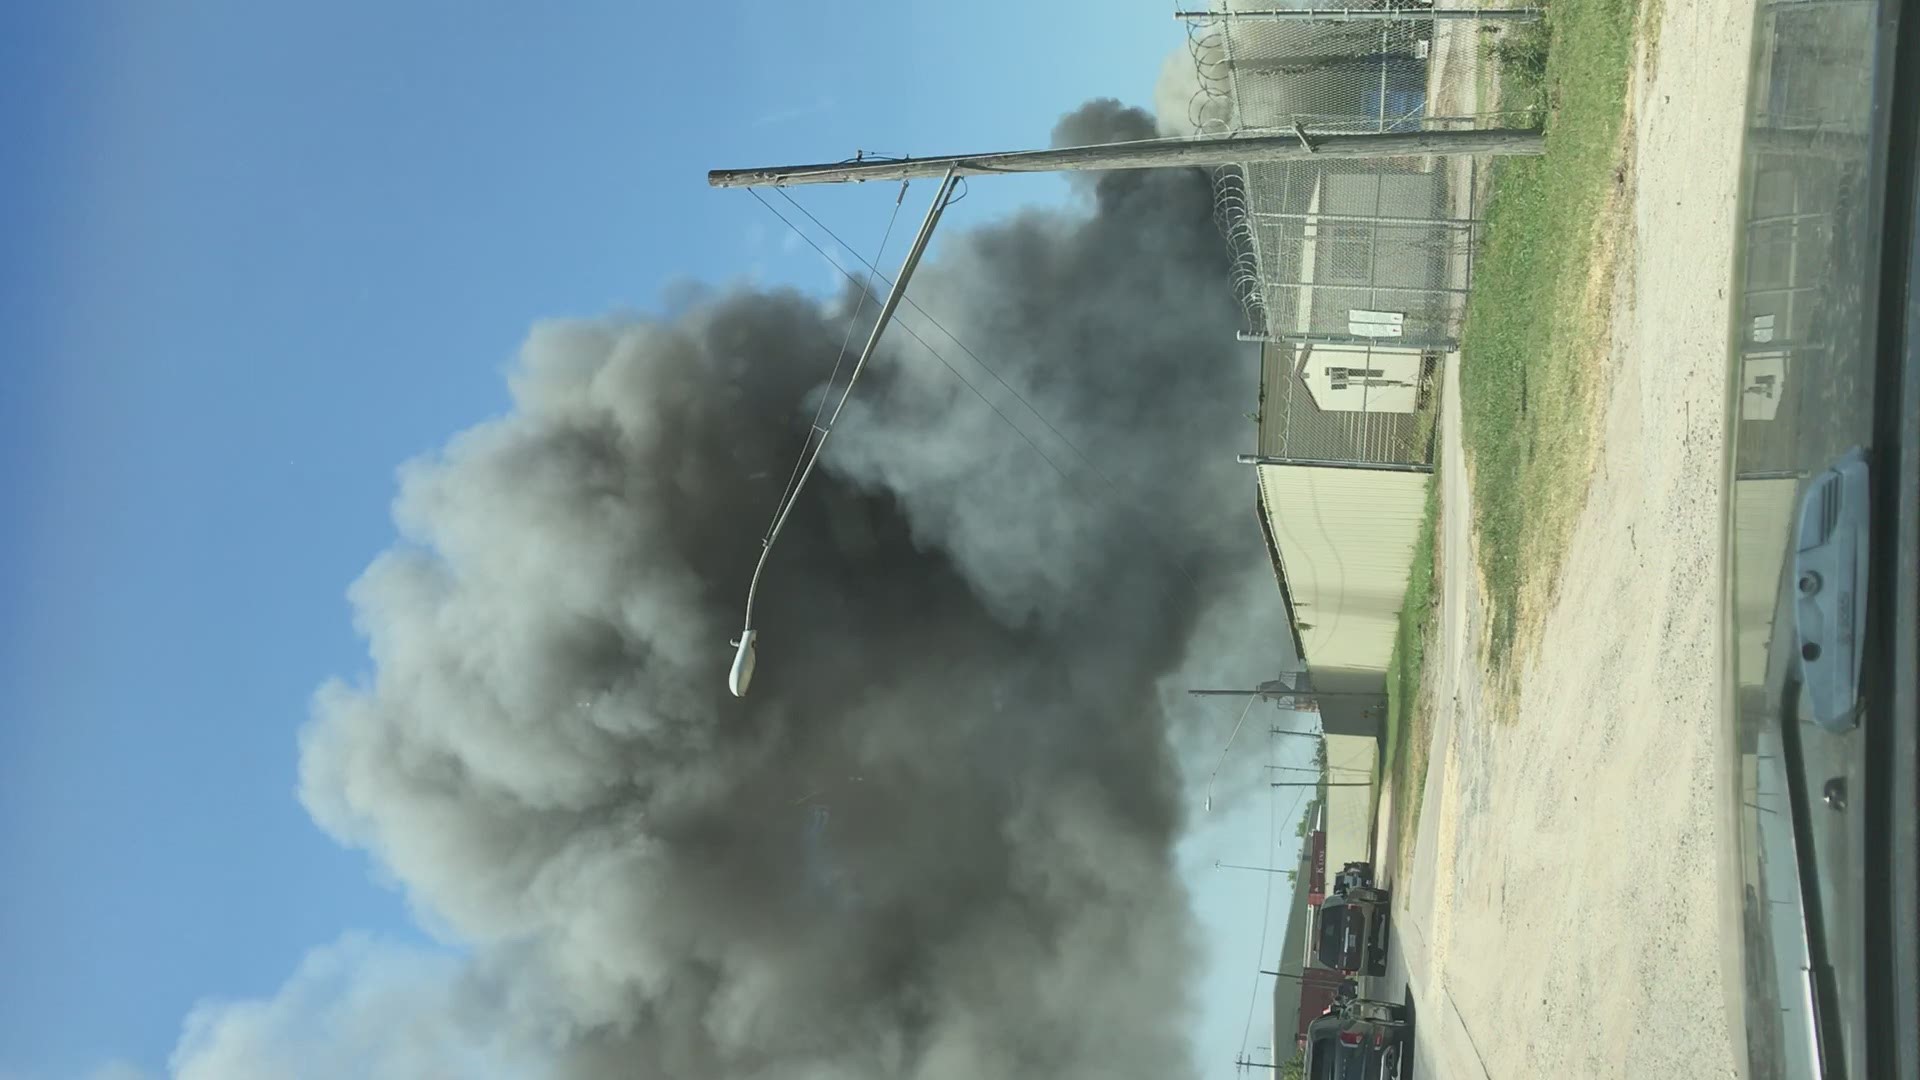 A trash fire sent a large plume of smoke into the sky on July 25, 2019. Courtesy of Isabel Benites.